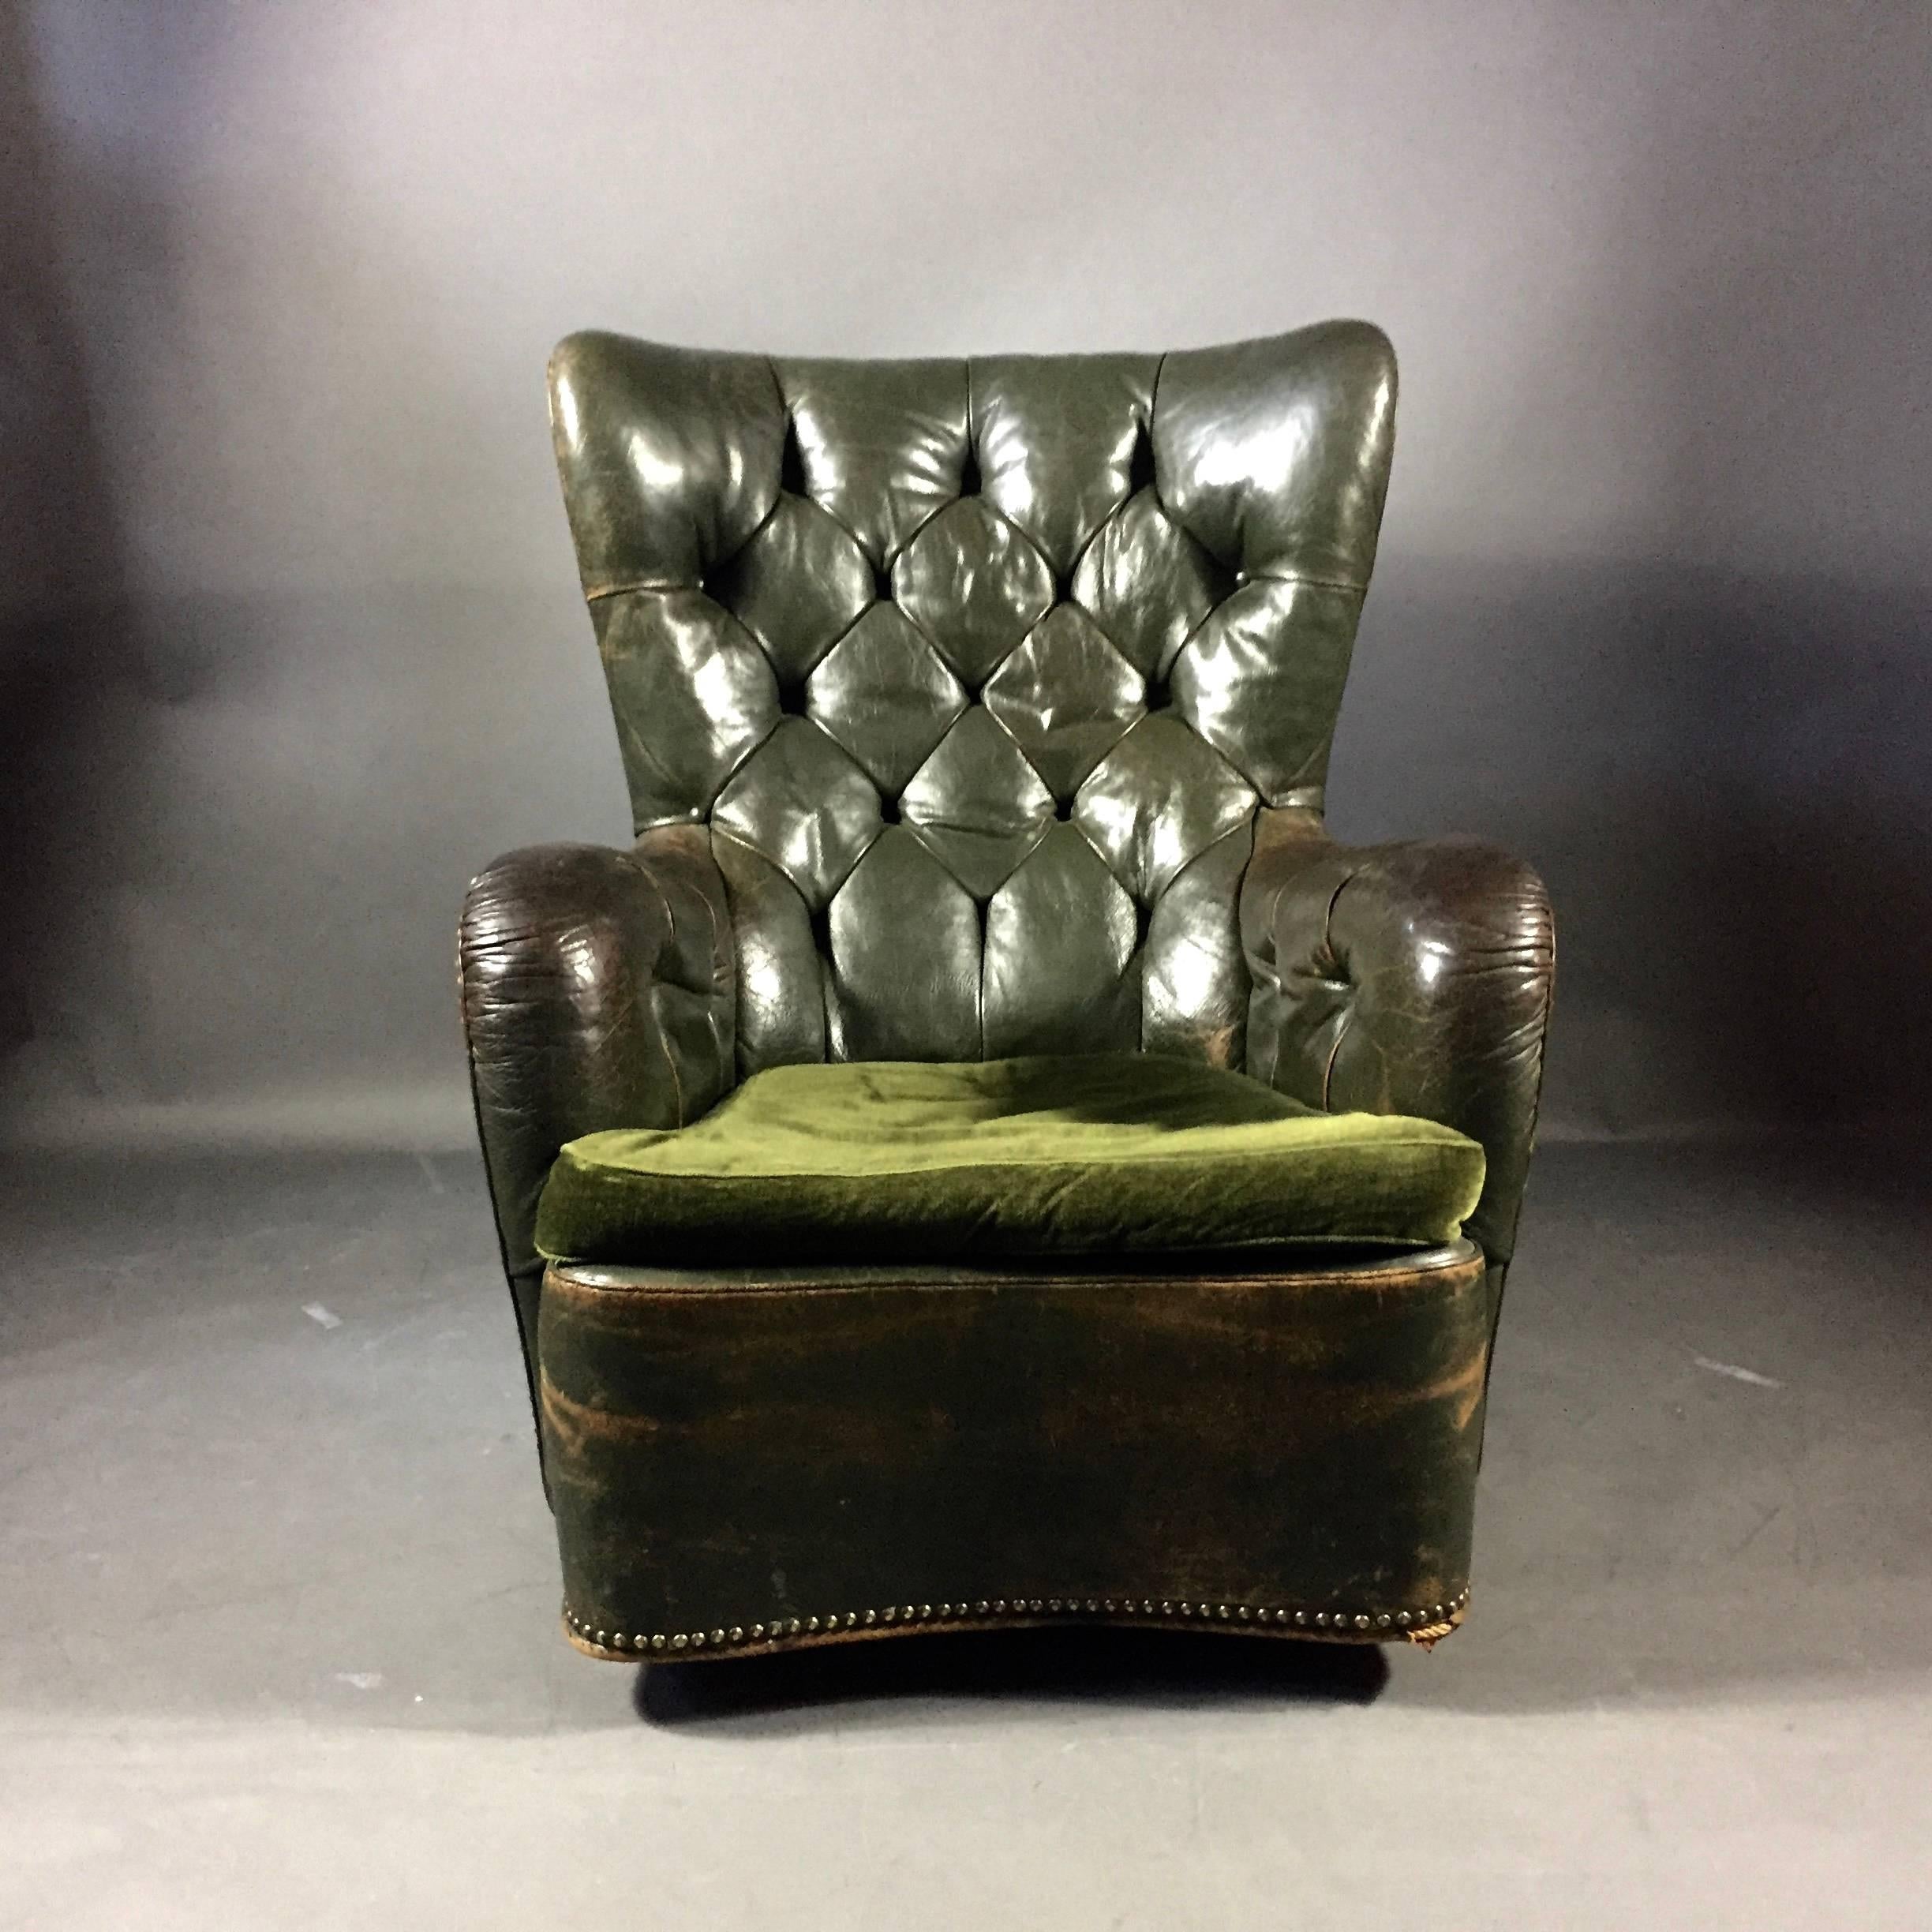 Gorgeous patina on this late Art Deco era 1930s green leather wing chair is perfection with deep tufting on back and arms, curved front and brass tacks overall. Non-original green velvet loose cushion. In terrific vintage condition. Danish design.